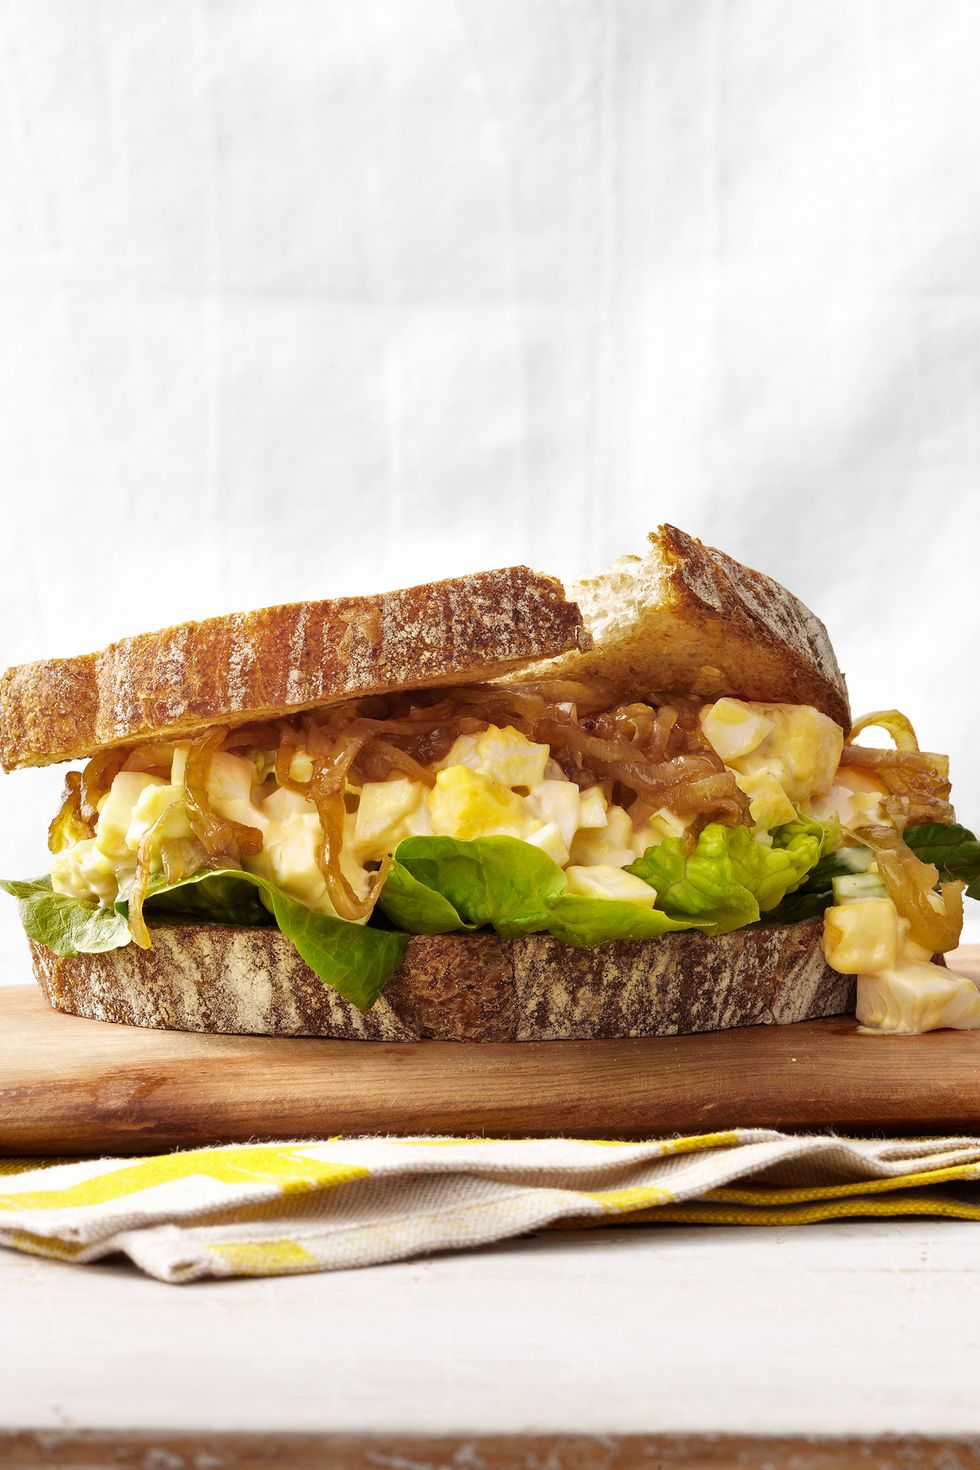 egg salad and caramelized onion sandwiches